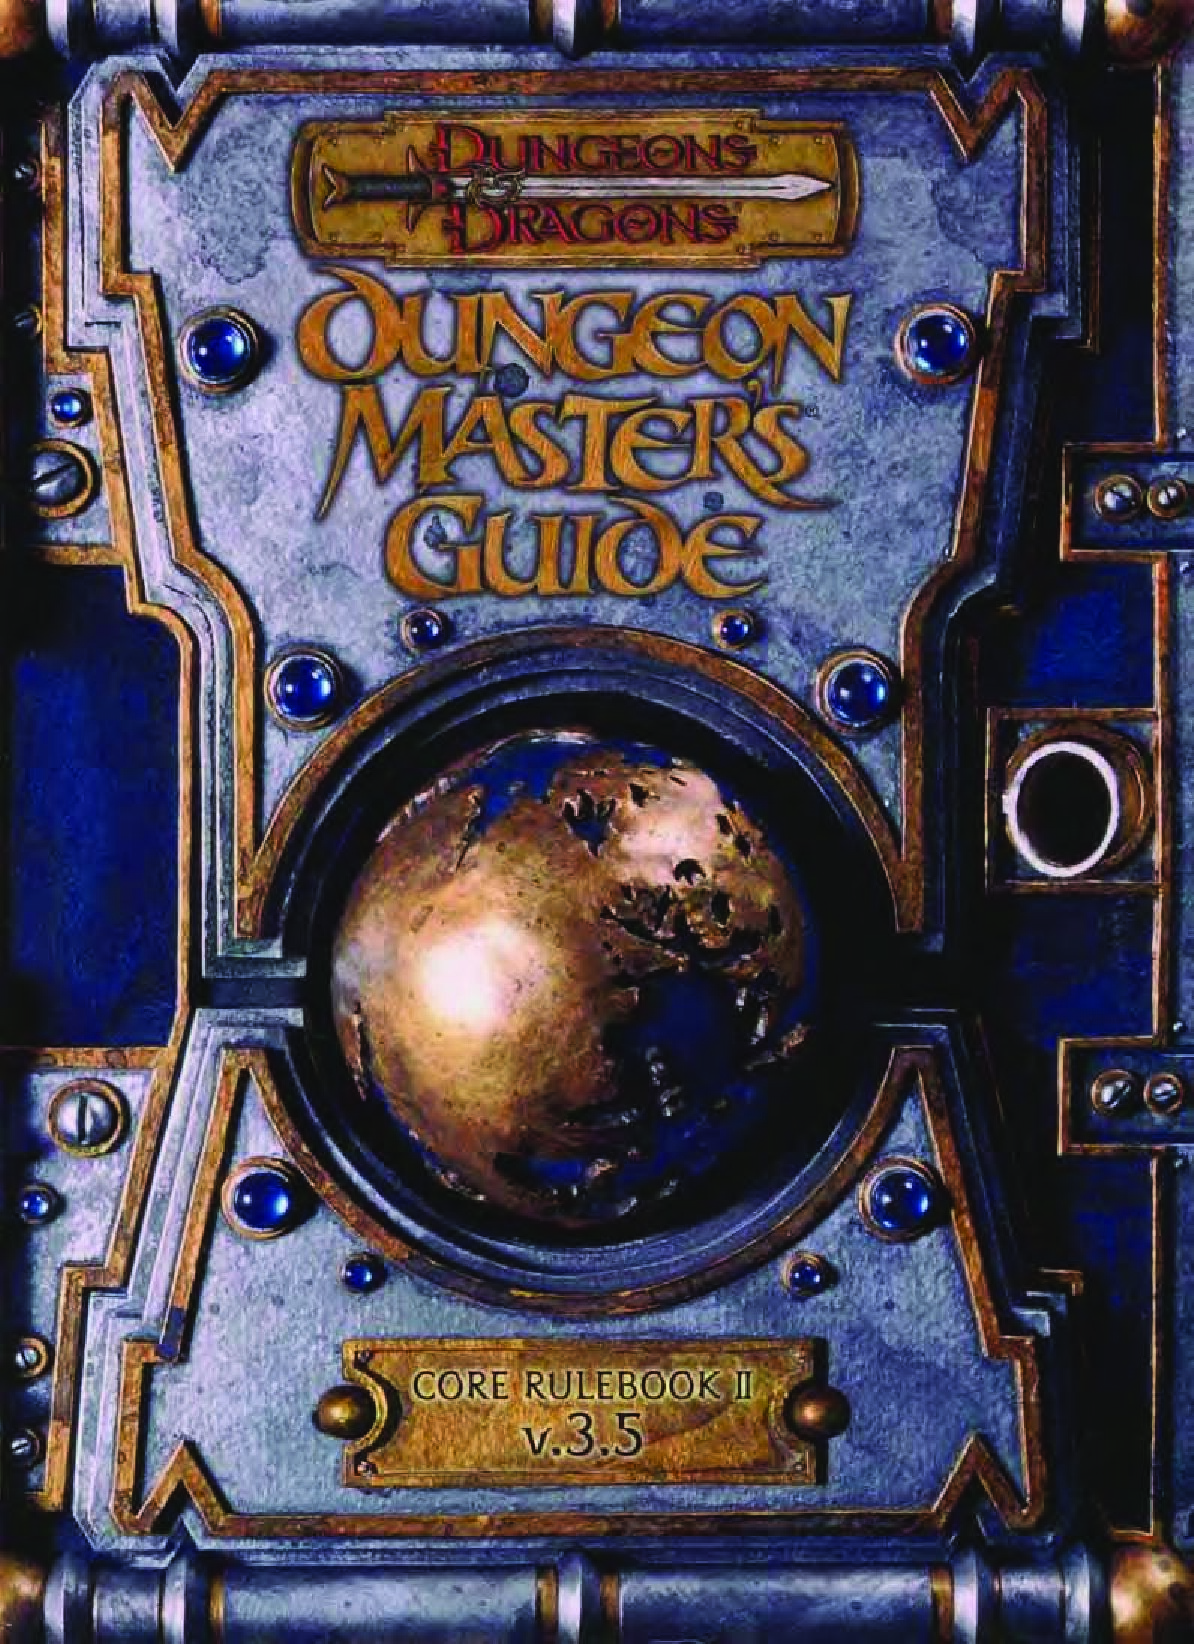 Dungeon Master's Guide Core Rulebook II v.3.5